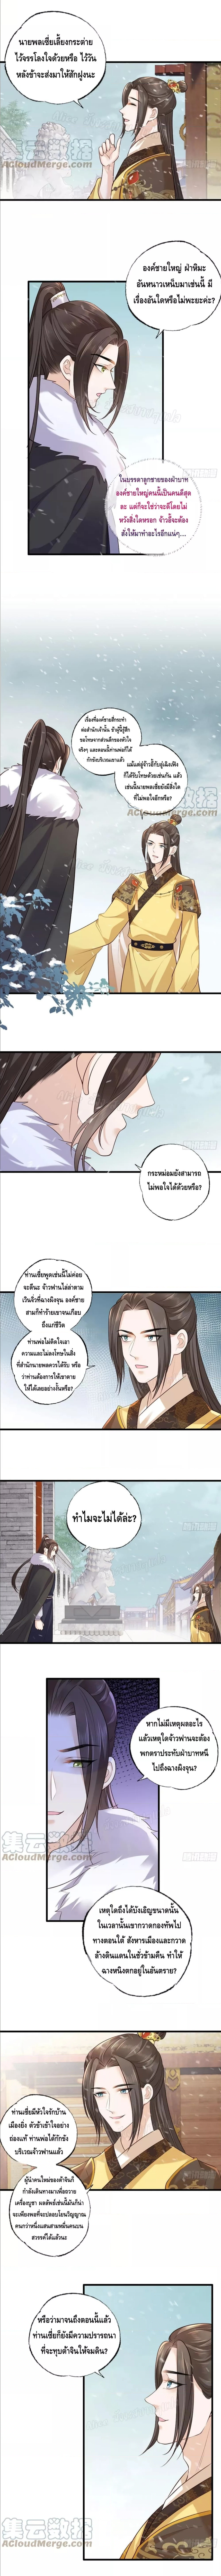 The Pampered Regent of The Richest Woman à¸à¸²à¸£à¸à¸¥à¸±à¸šà¸¡à¸²à¸‚à¸­à¸‡à¸„à¸¸à¸“à¸«à¸™à¸¹à¸œà¸¹à¹‰à¸£à¹ˆà¸³à¸£à¸§à¸¢à¸—à¸µà¹ˆà¸ªà¸¸à¸” à¸•à¸­à¸™à¸—à¸µà¹ˆ 129 (3)